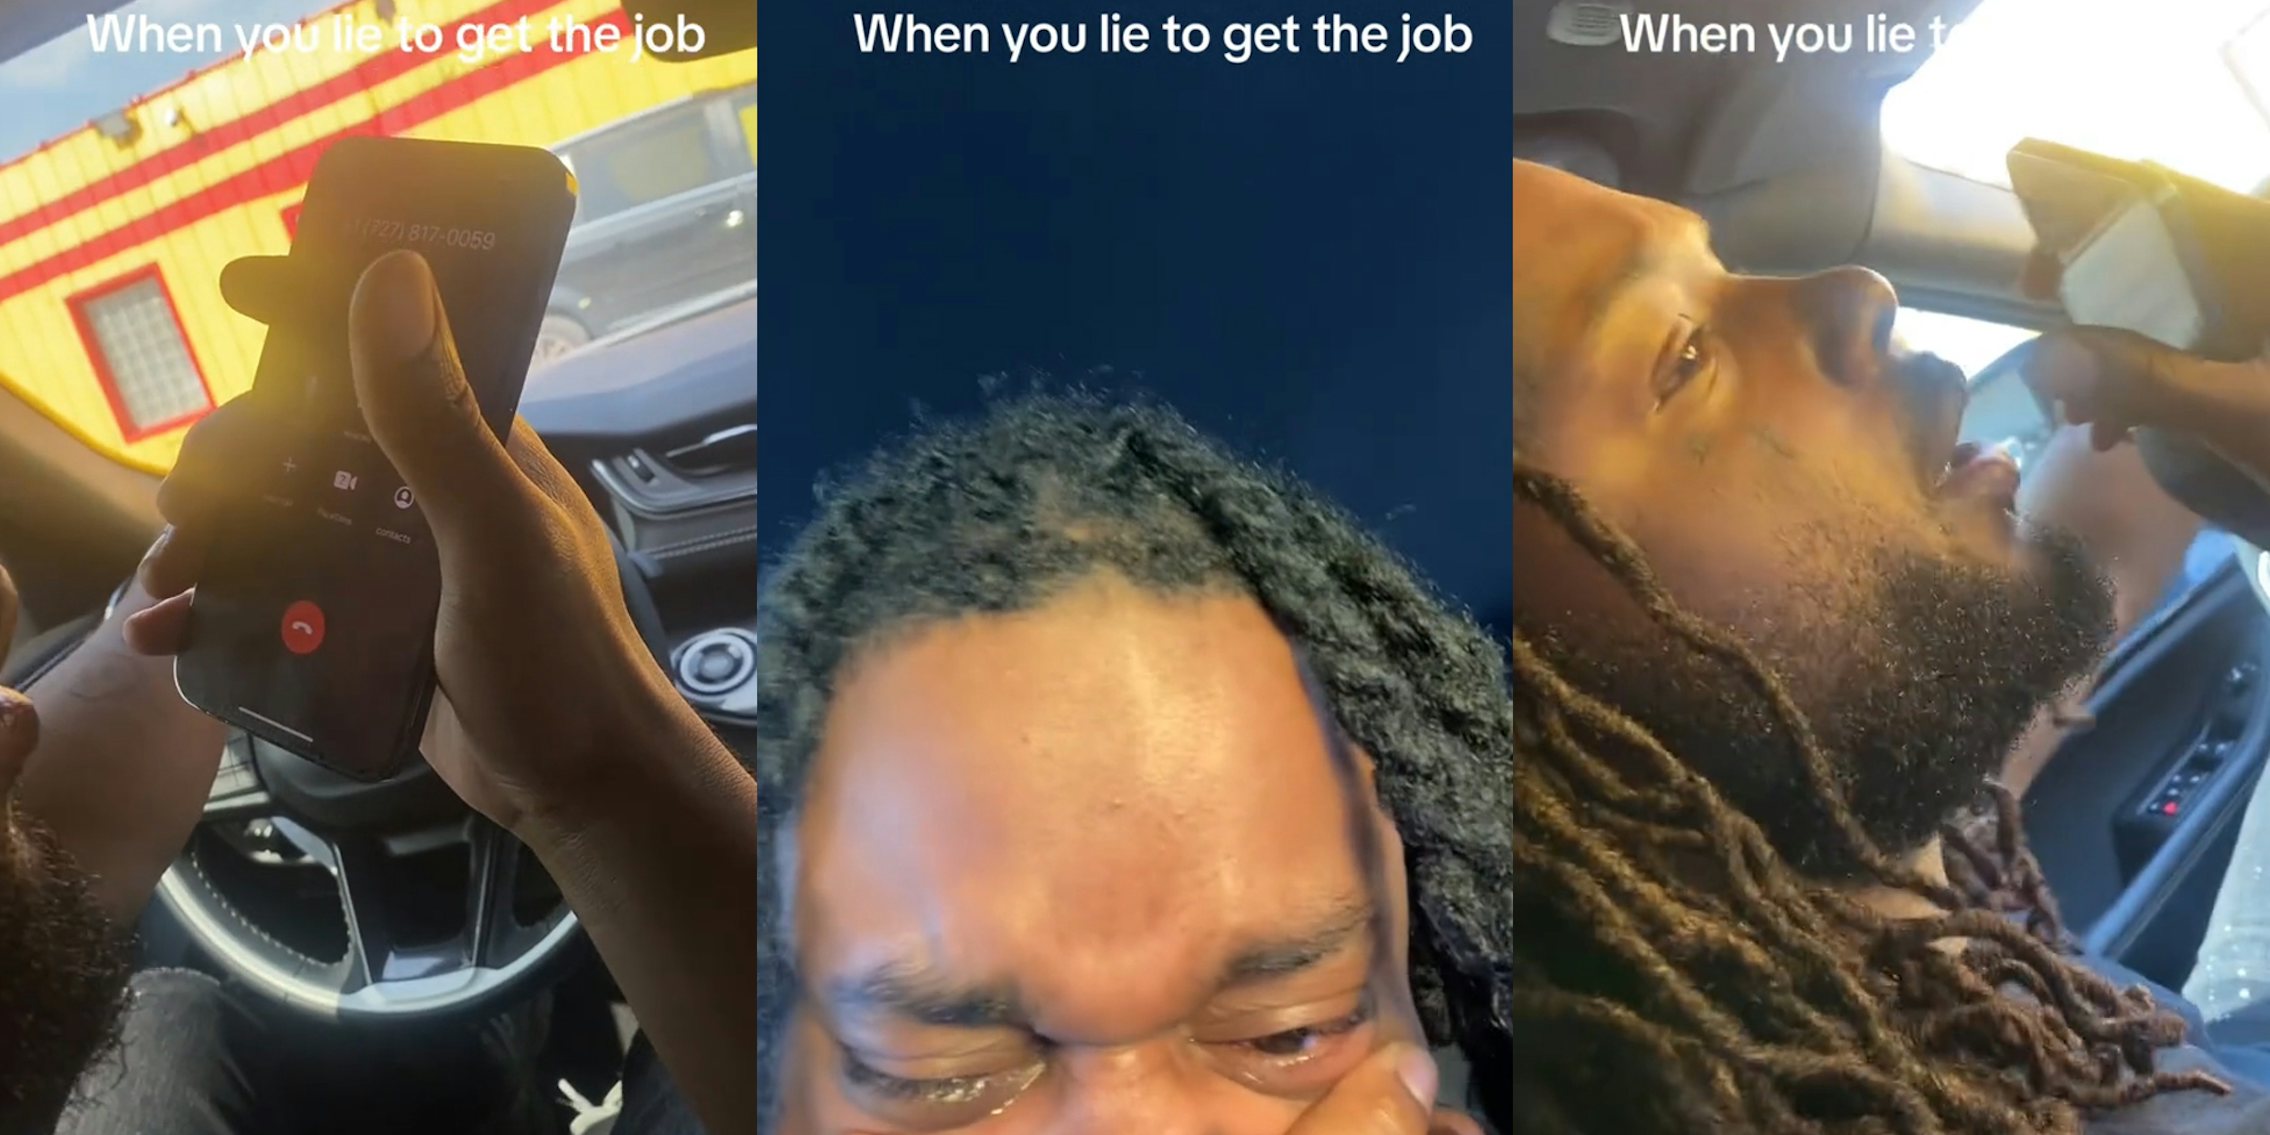 job hunter speaking on the phone in car with caption 'When you lie to get the job' (l) job hunter friend in car laughing with caption 'When you lie to get the job' (c) job hunter speaking on the phone in car with caption 'When you lie to get the job' (r)